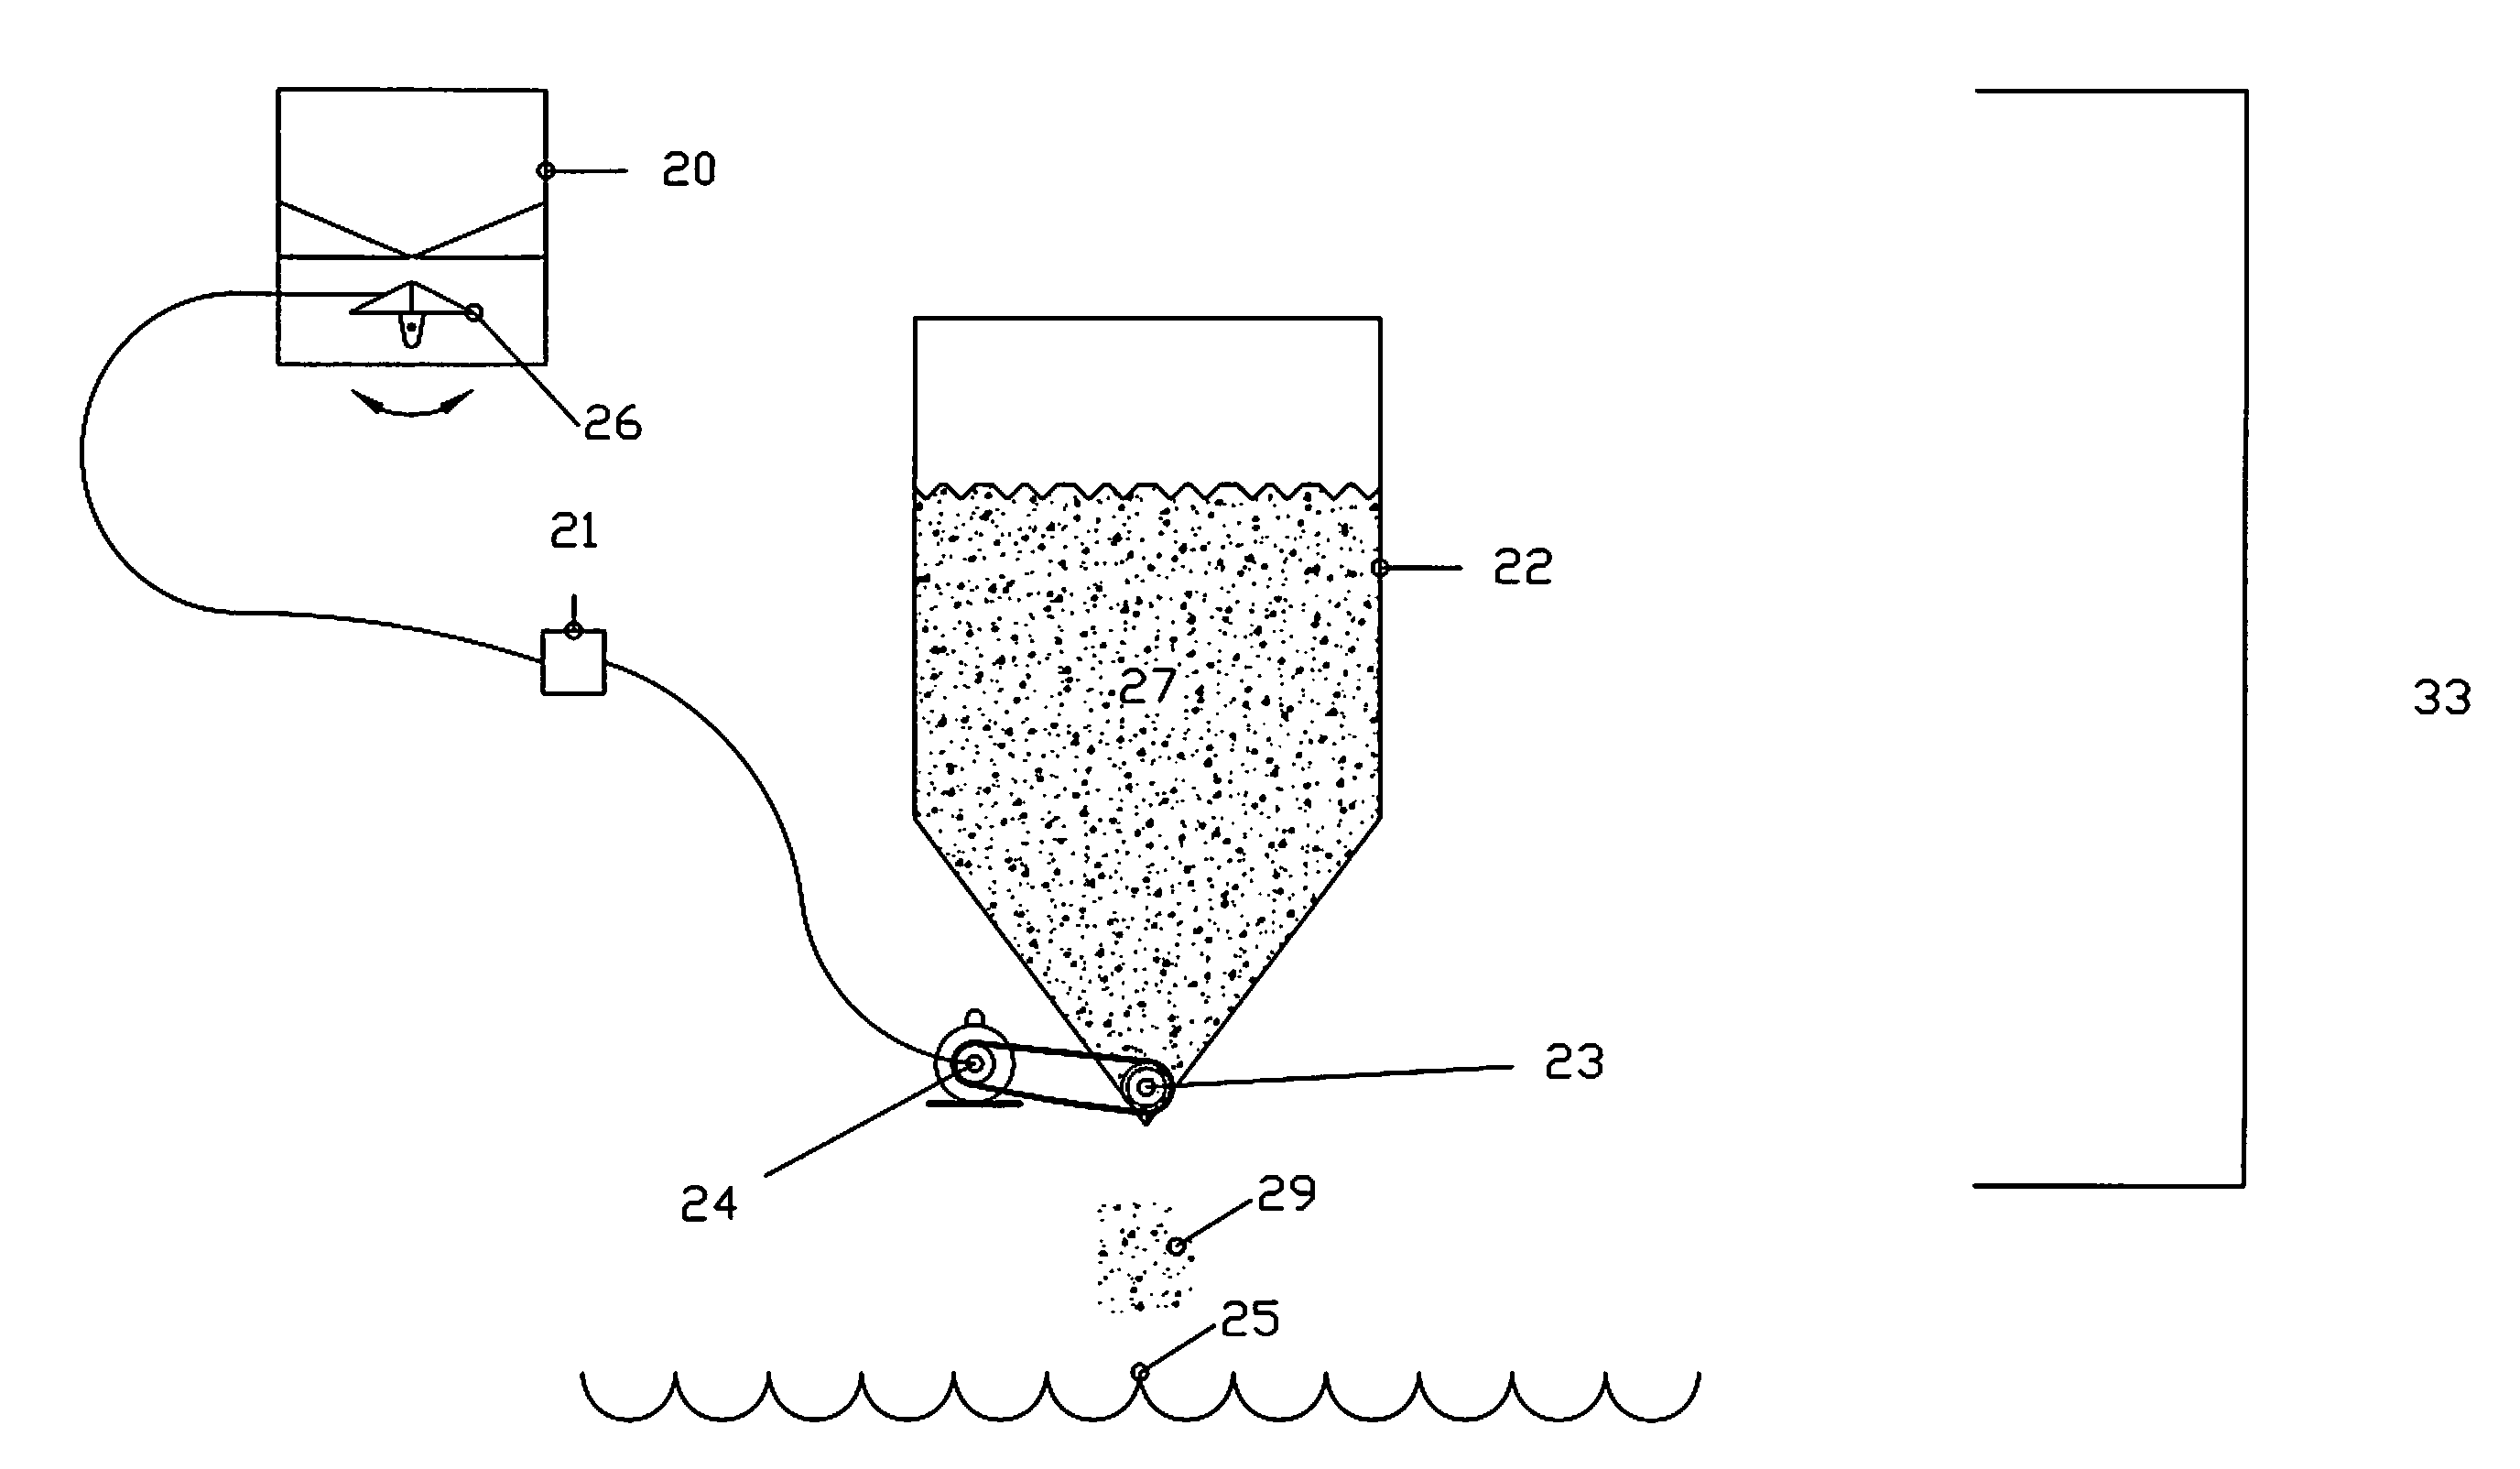 Method for treating runoff water using a series of treatment sequences to remove fine pollutants and clay